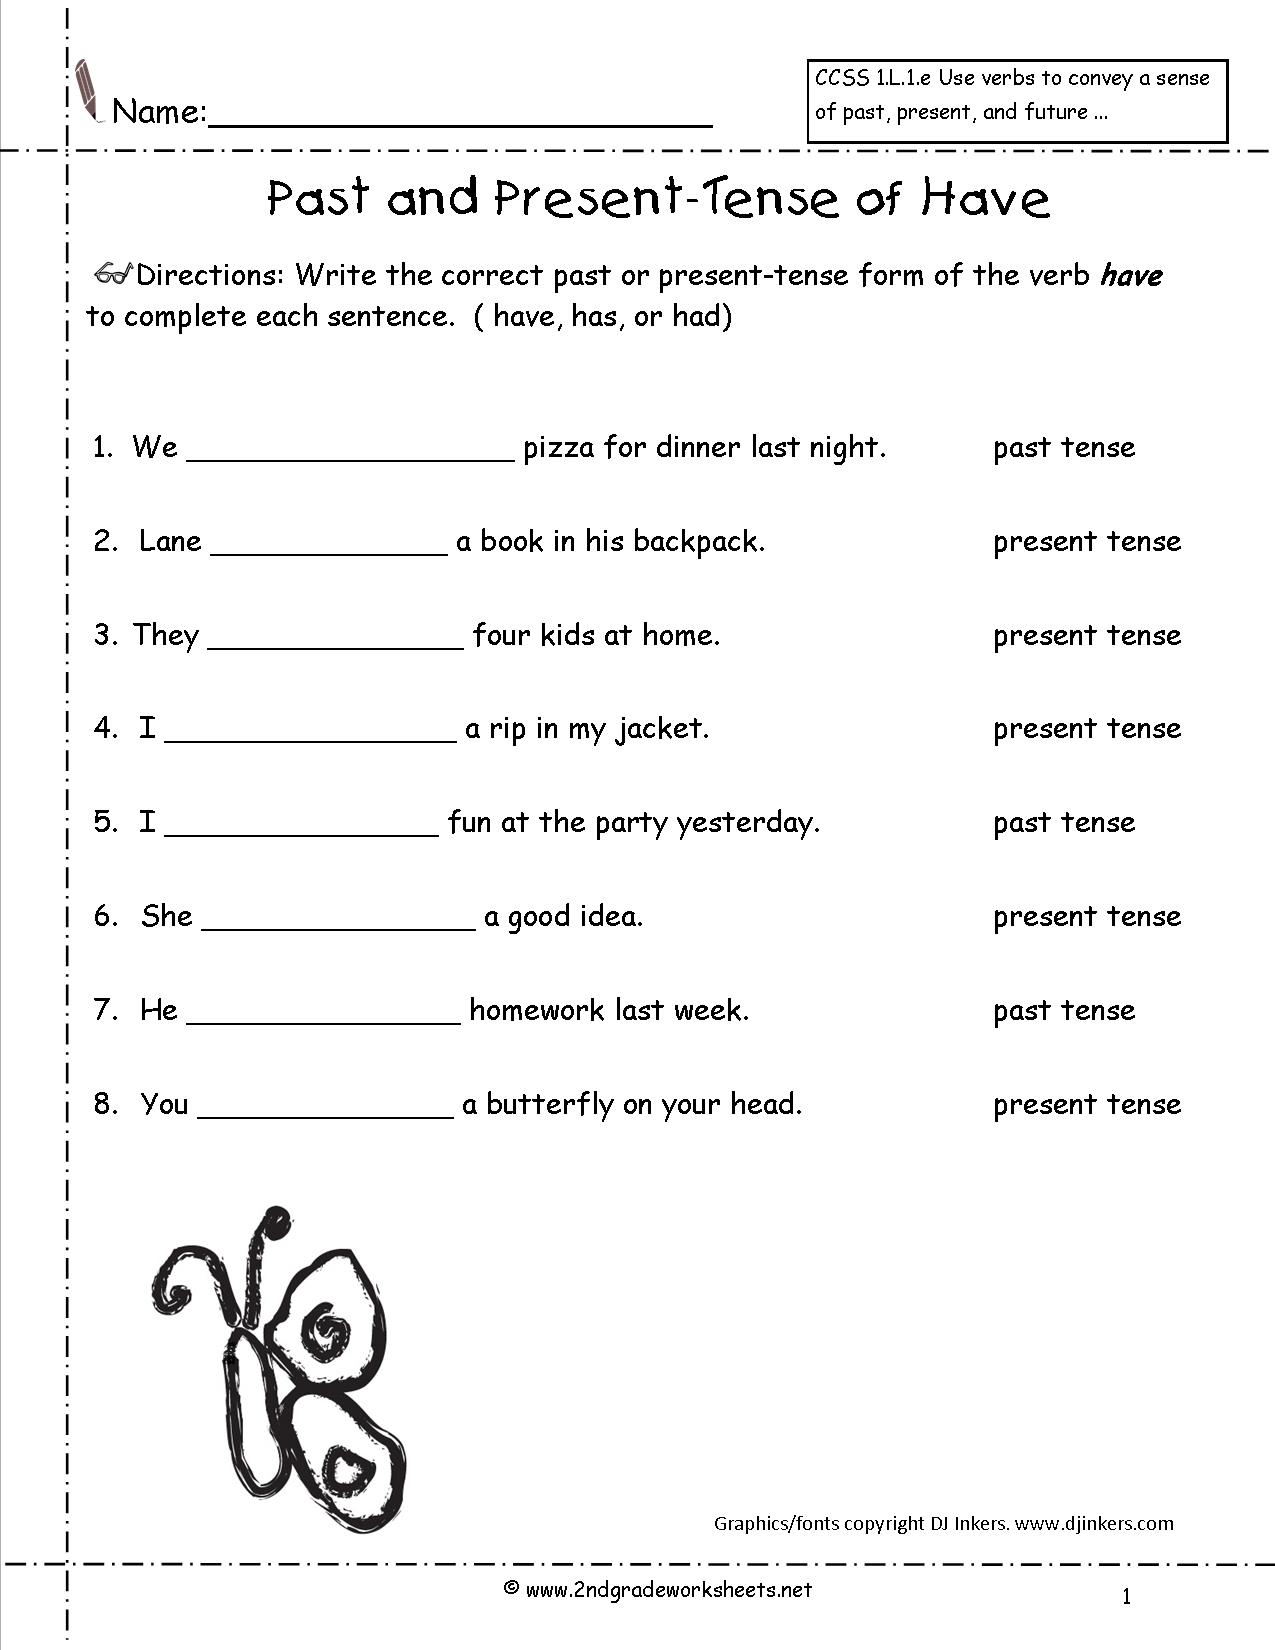 Past Tense And Present Tense Verbs Worksheets For 3rd Grade